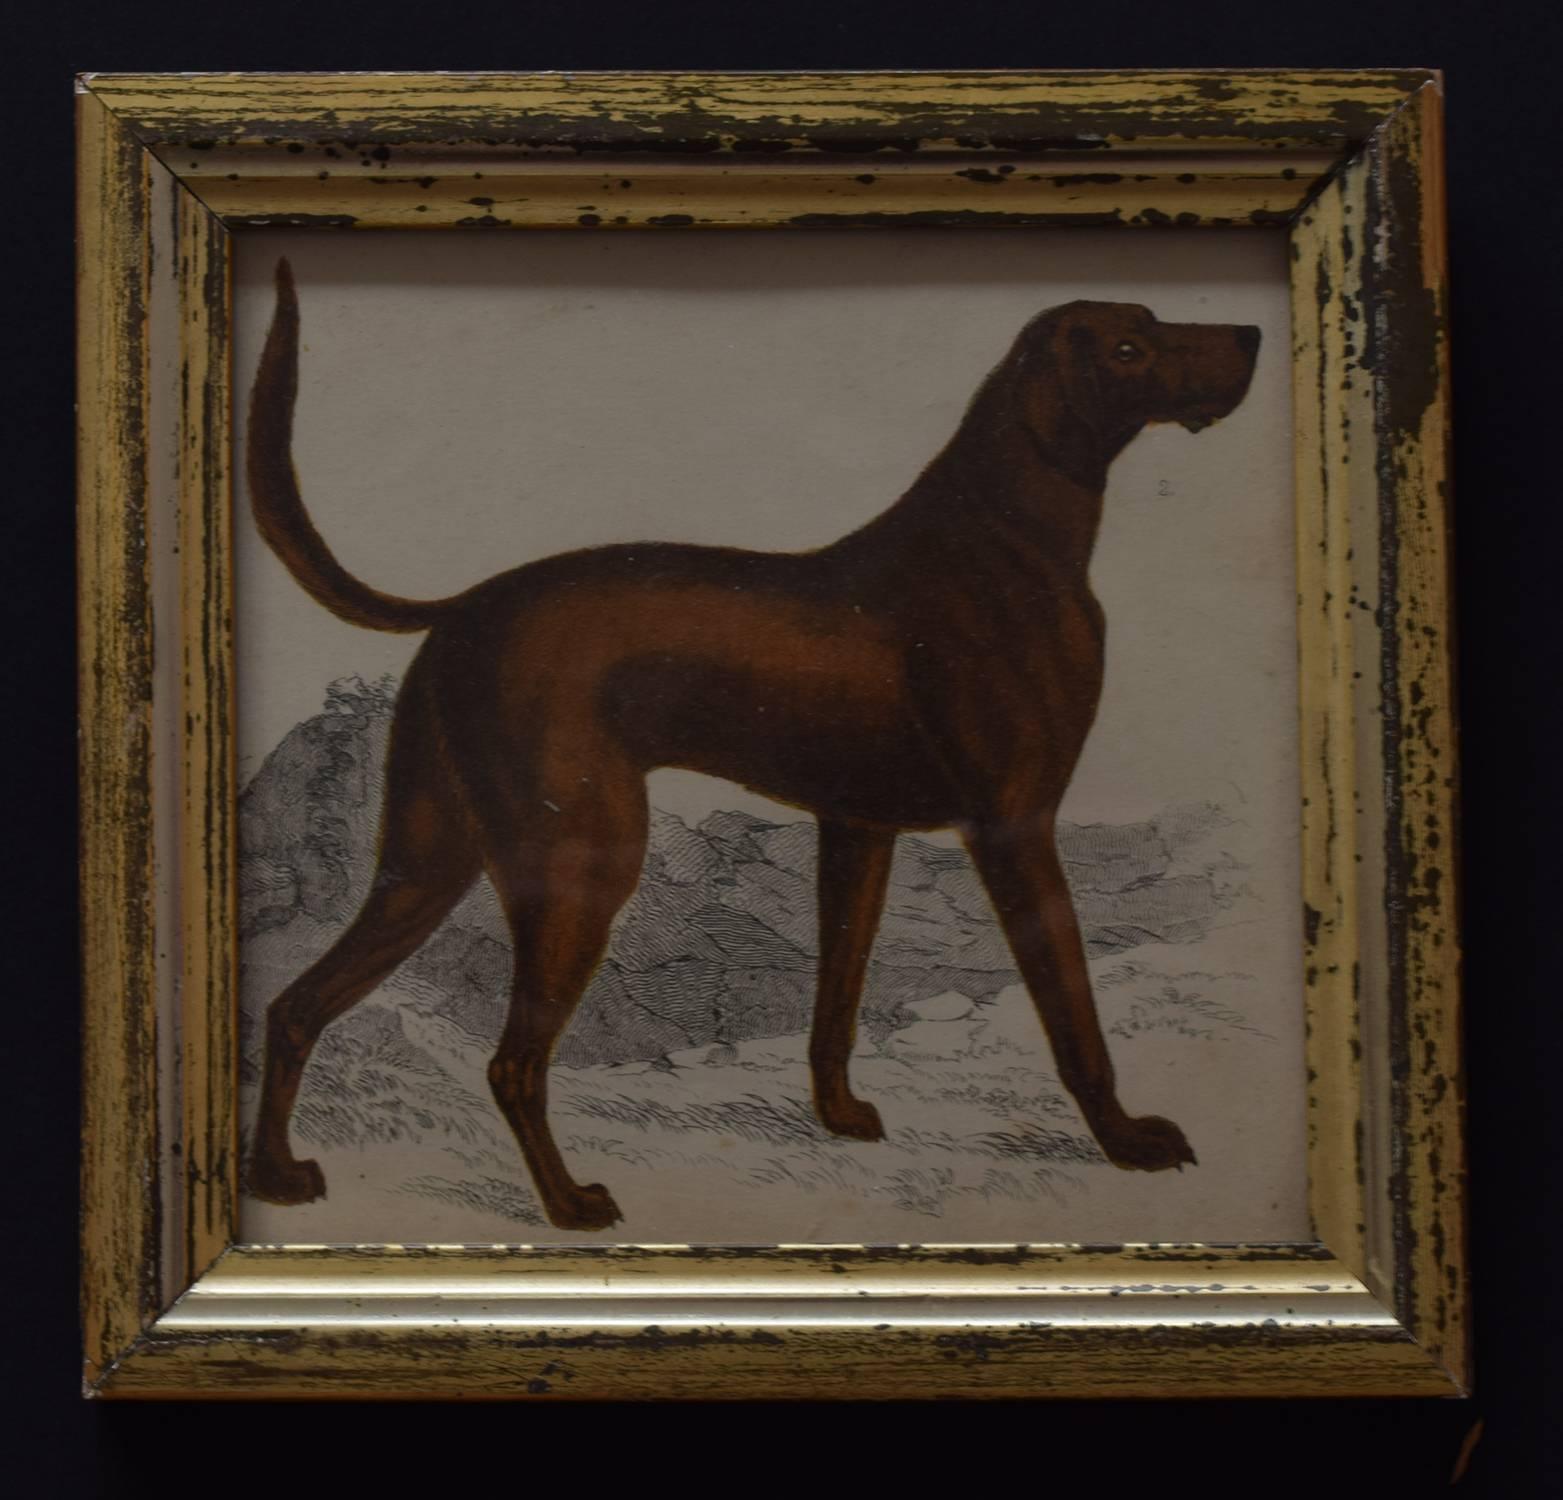 Charming print of a bloodhound. It is a hand-coloured steel engraving in a distressed oil gilded frame.

Published by Fullarton. London  Circa 1850.